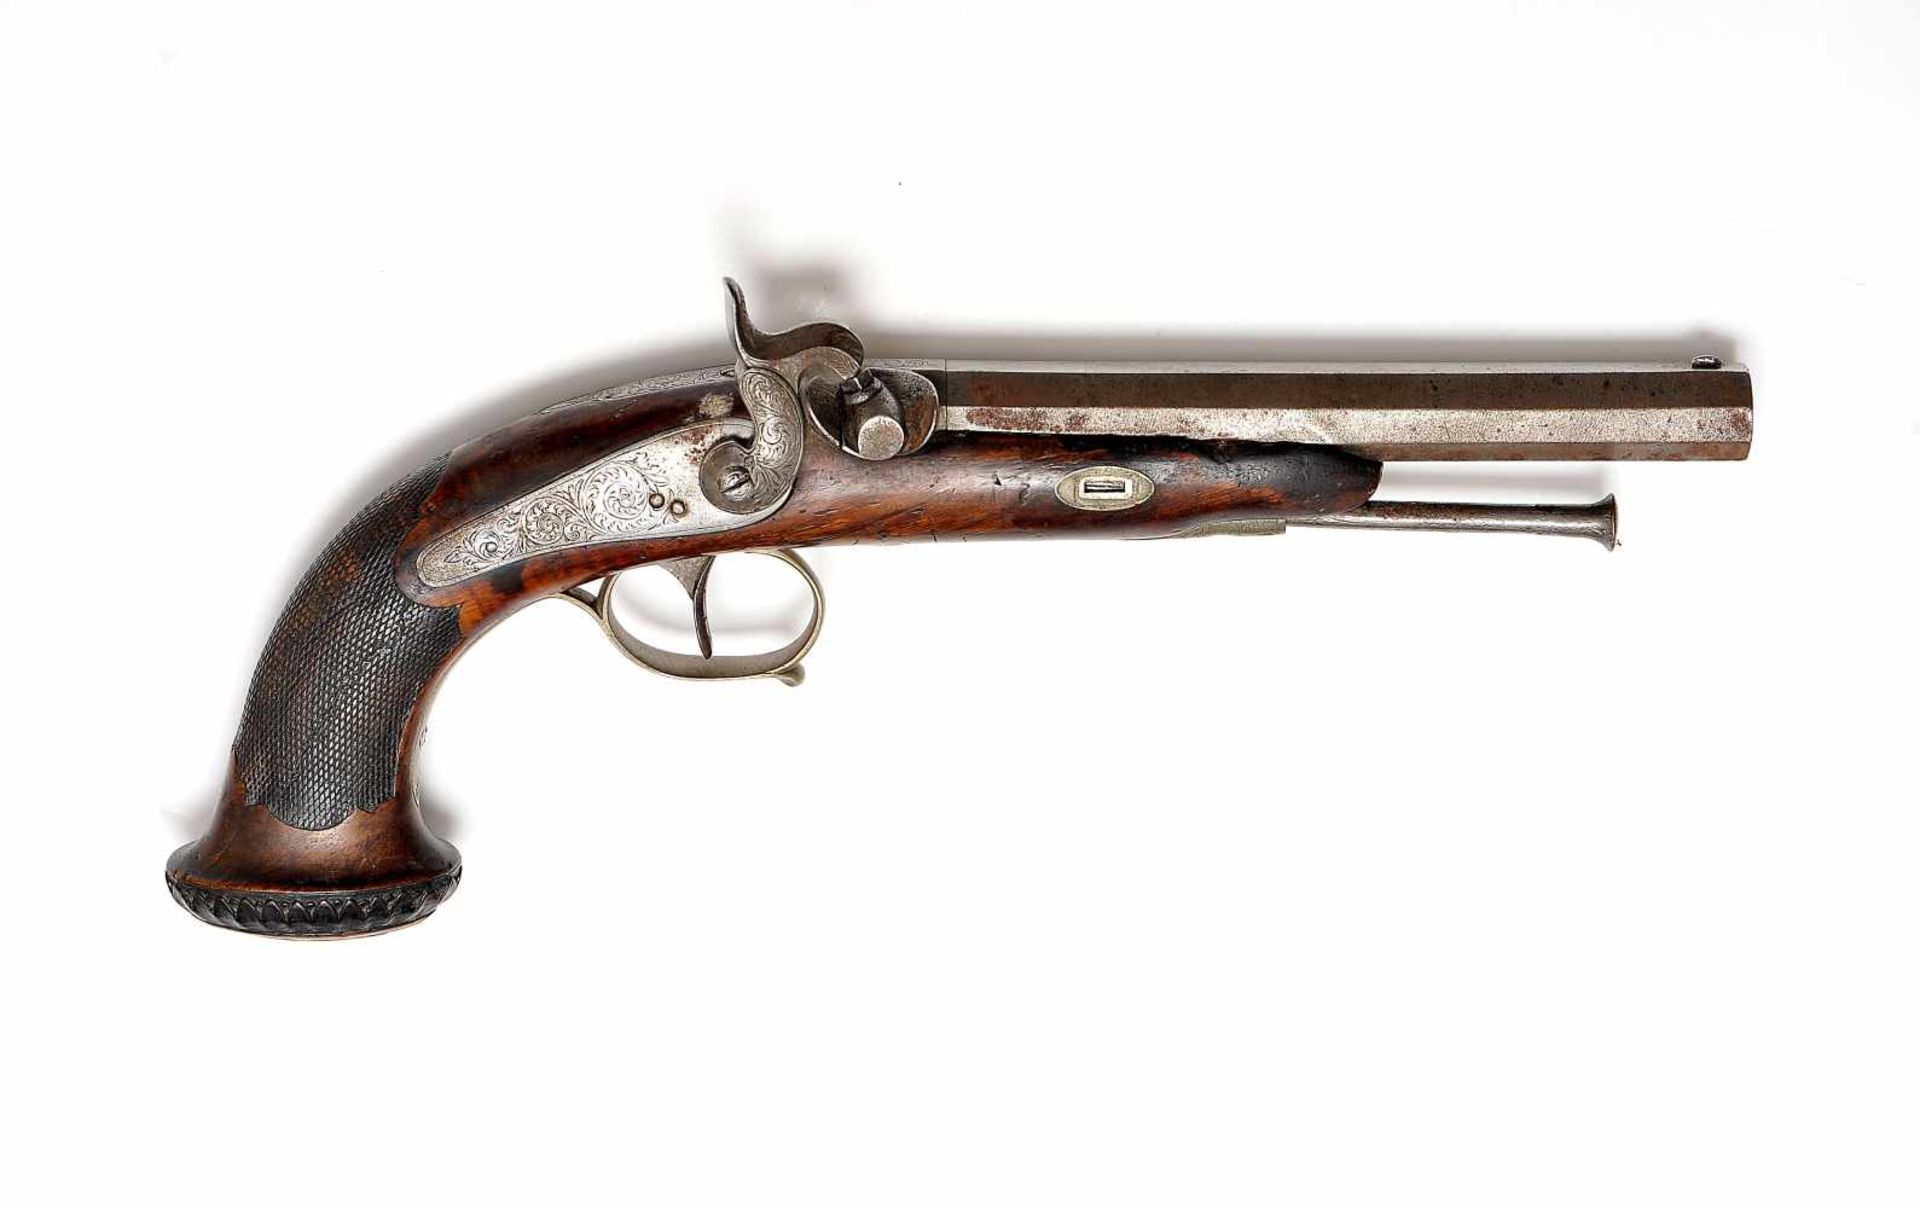 A Percussion Pistol, carved walnut and iron, engraved decoration, European, 19th C. (mid), Dim. - 34